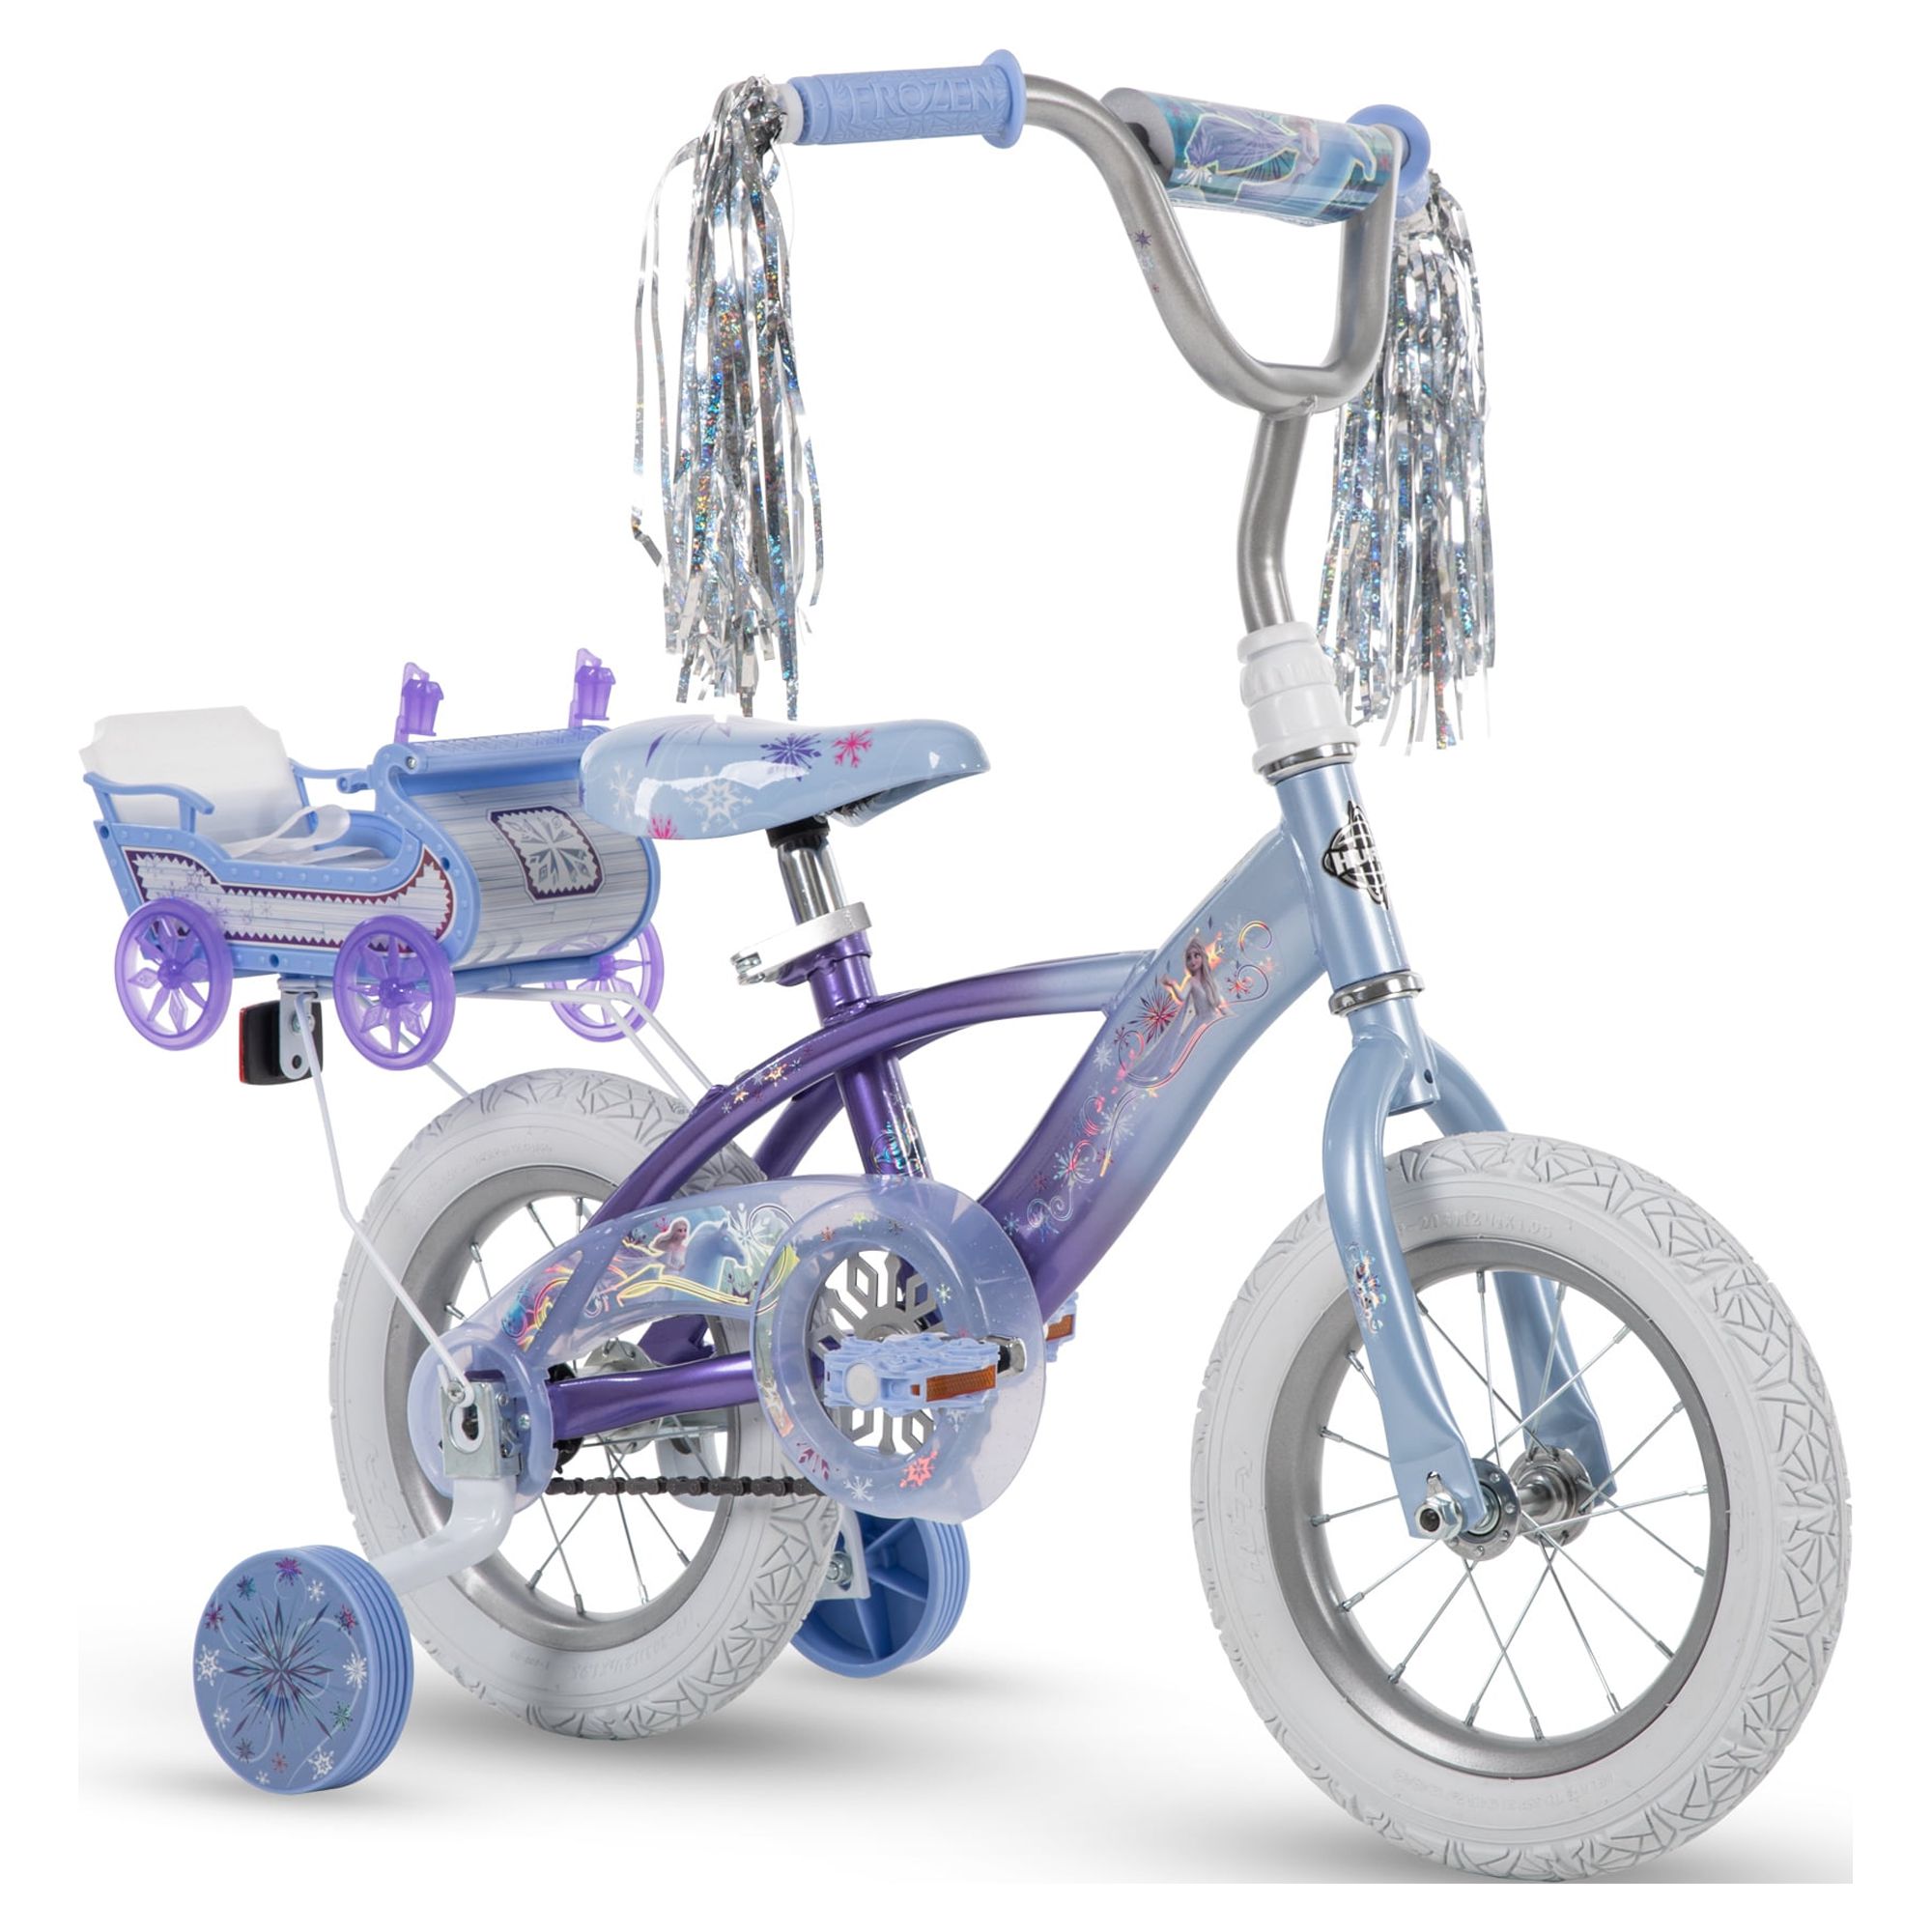 Disney Frozen 12 in. Bike with Doll Carrier Sleigh for Girl's, Ages 2+ Years, White and Purple by Huffy - image 2 of 19